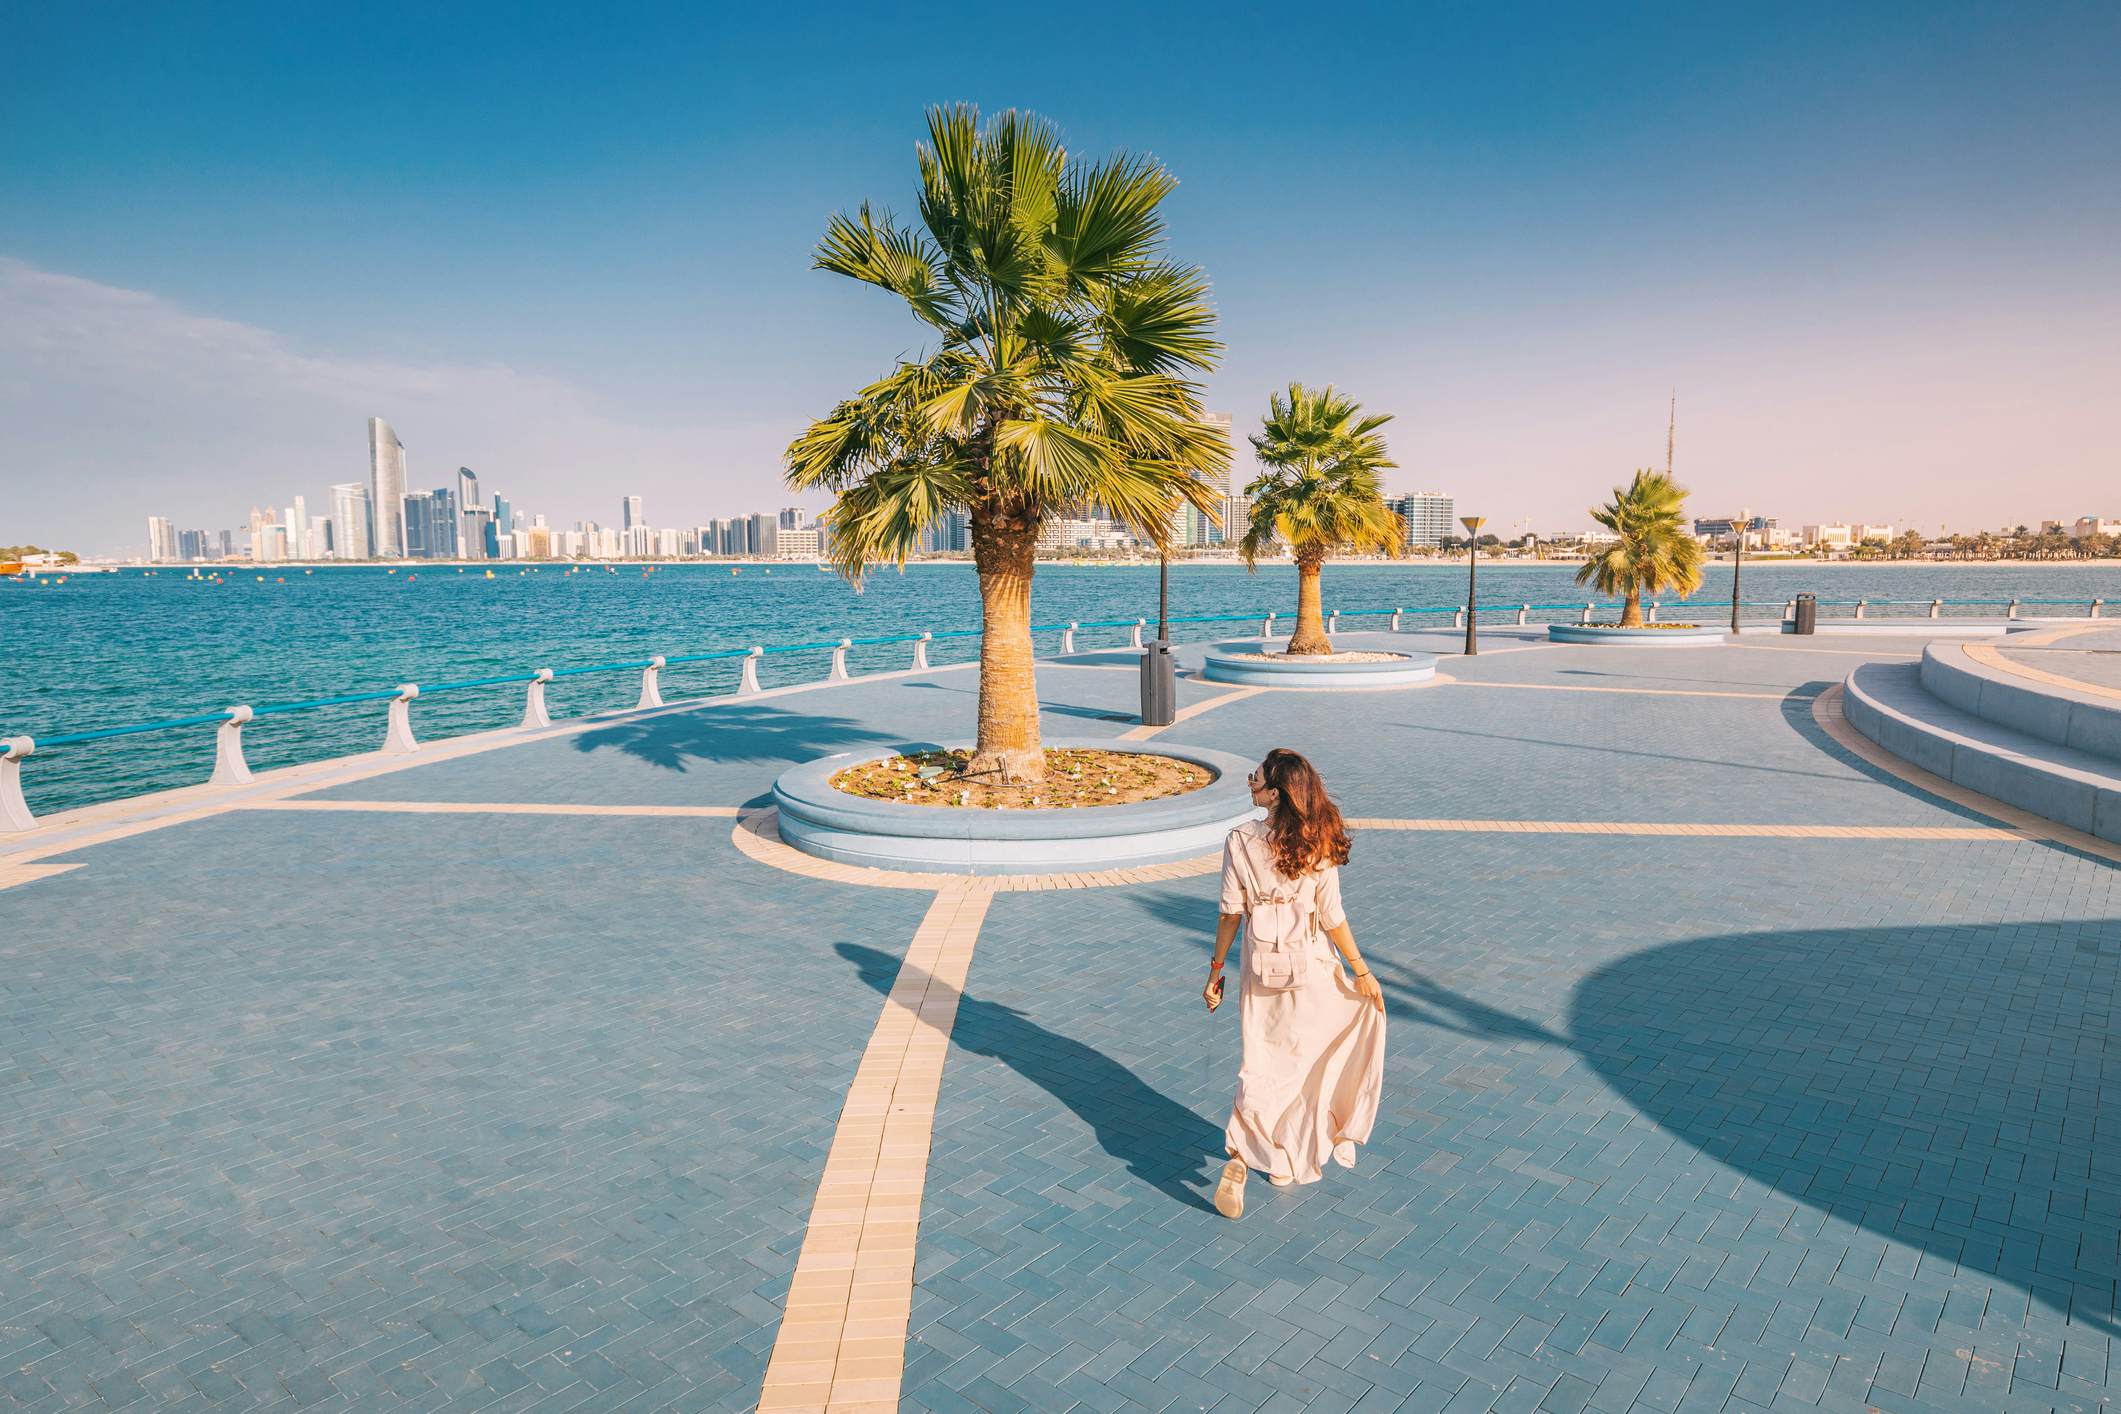 16 things to know before going to Abu Dhabi - Lonely Planet